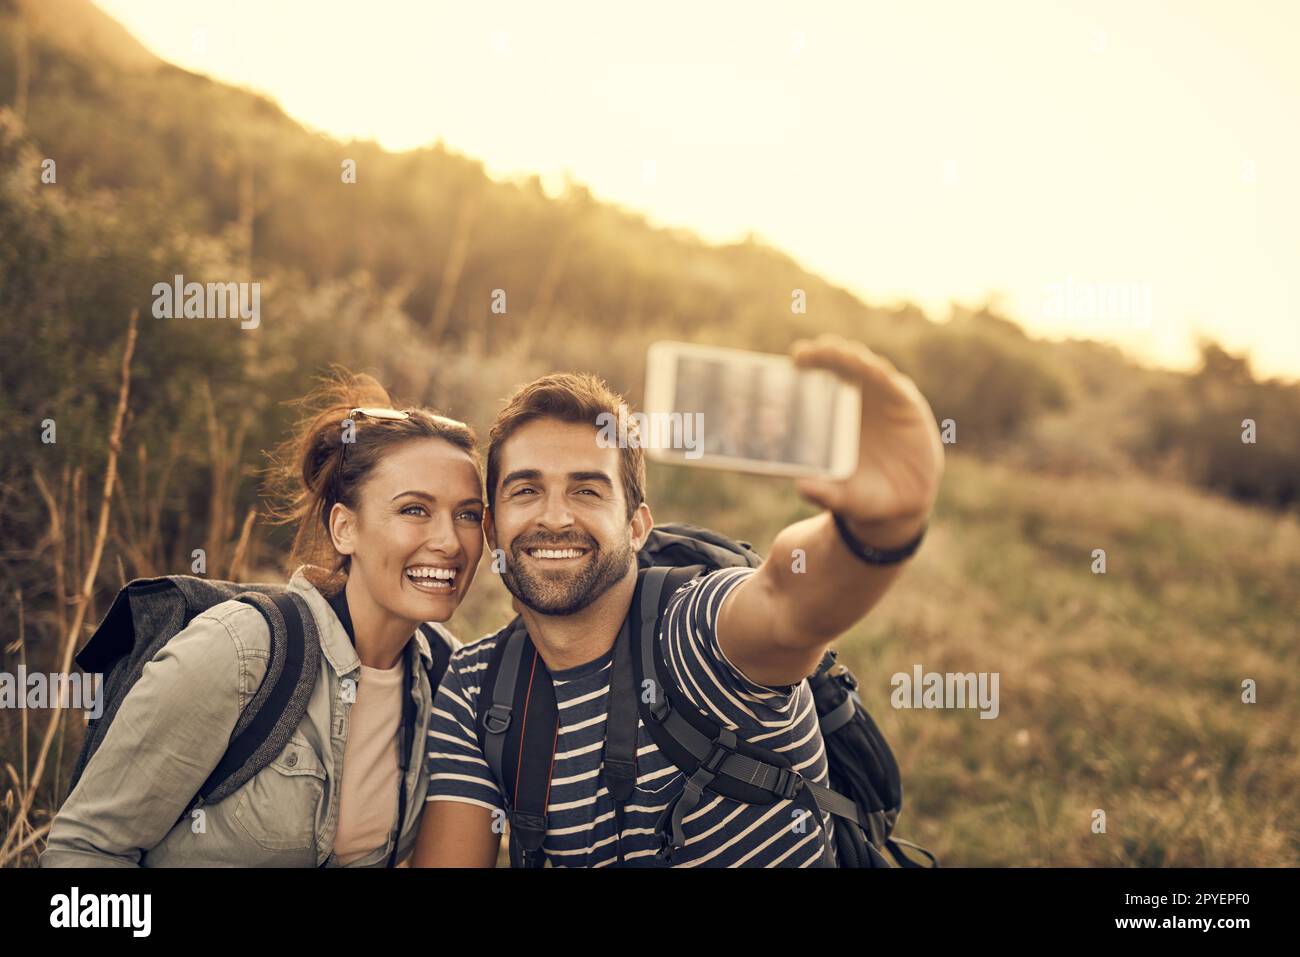 This is a date to be remembered. a happy couple taking a selfie while out on a hiking trip. Stock Photo